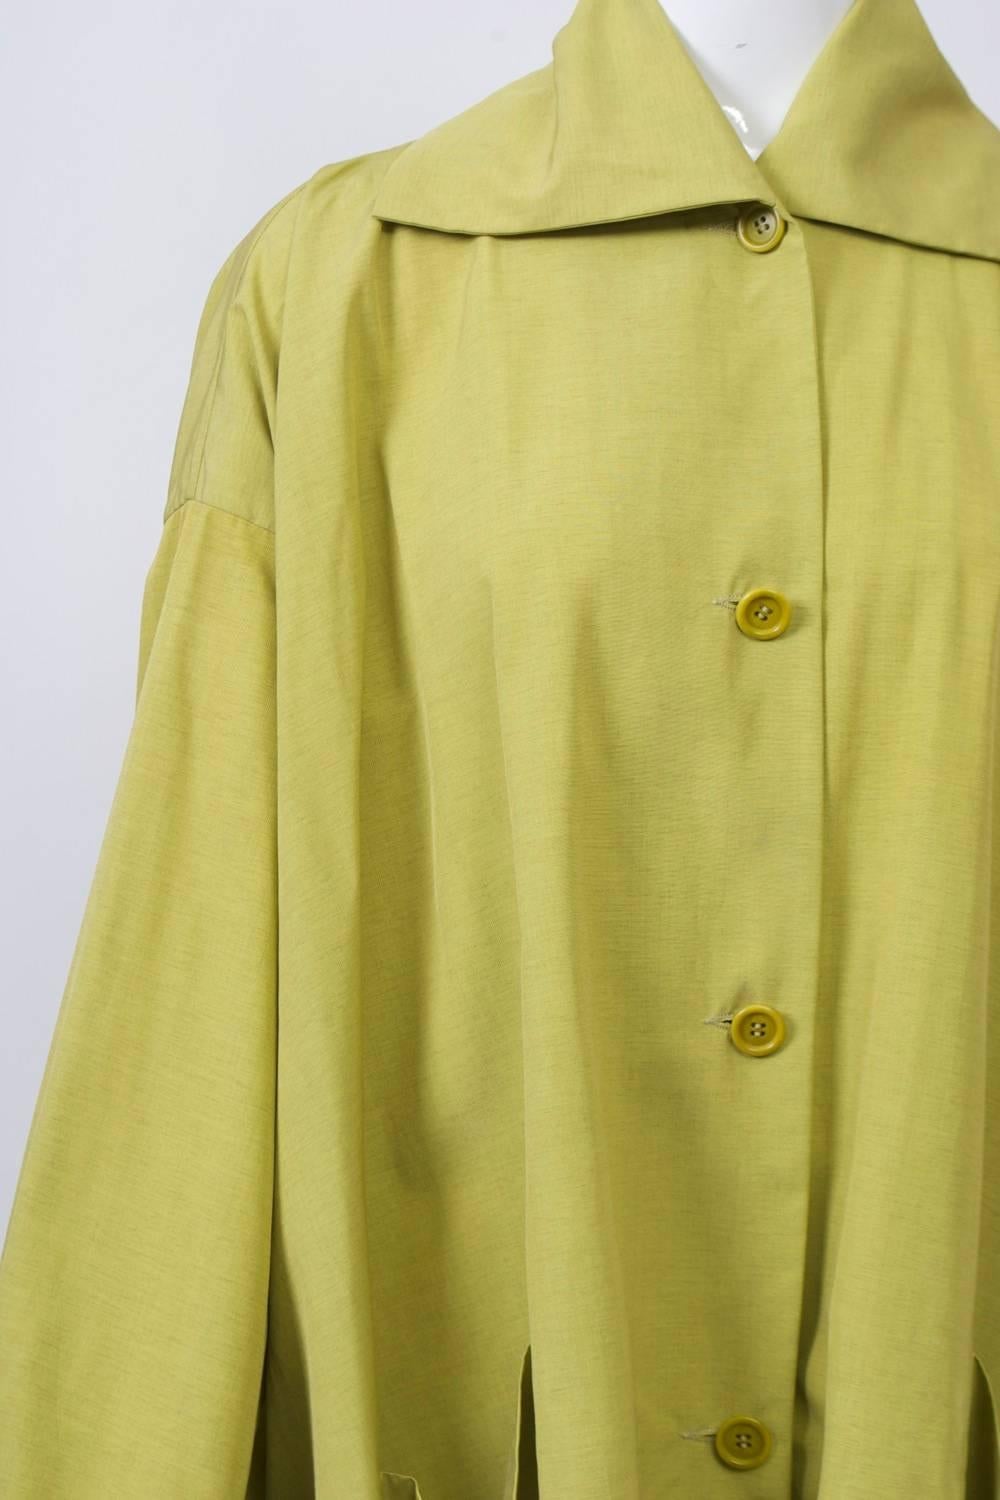 Oversized shirt in a chartreuse silk blend by Romeo Gigli, whose designs from the 1980 are much sought after. With its oversized, swing design, the shirt features a large spread collar, turned-back cuffs on wide sleeves with dropped shoulders, and